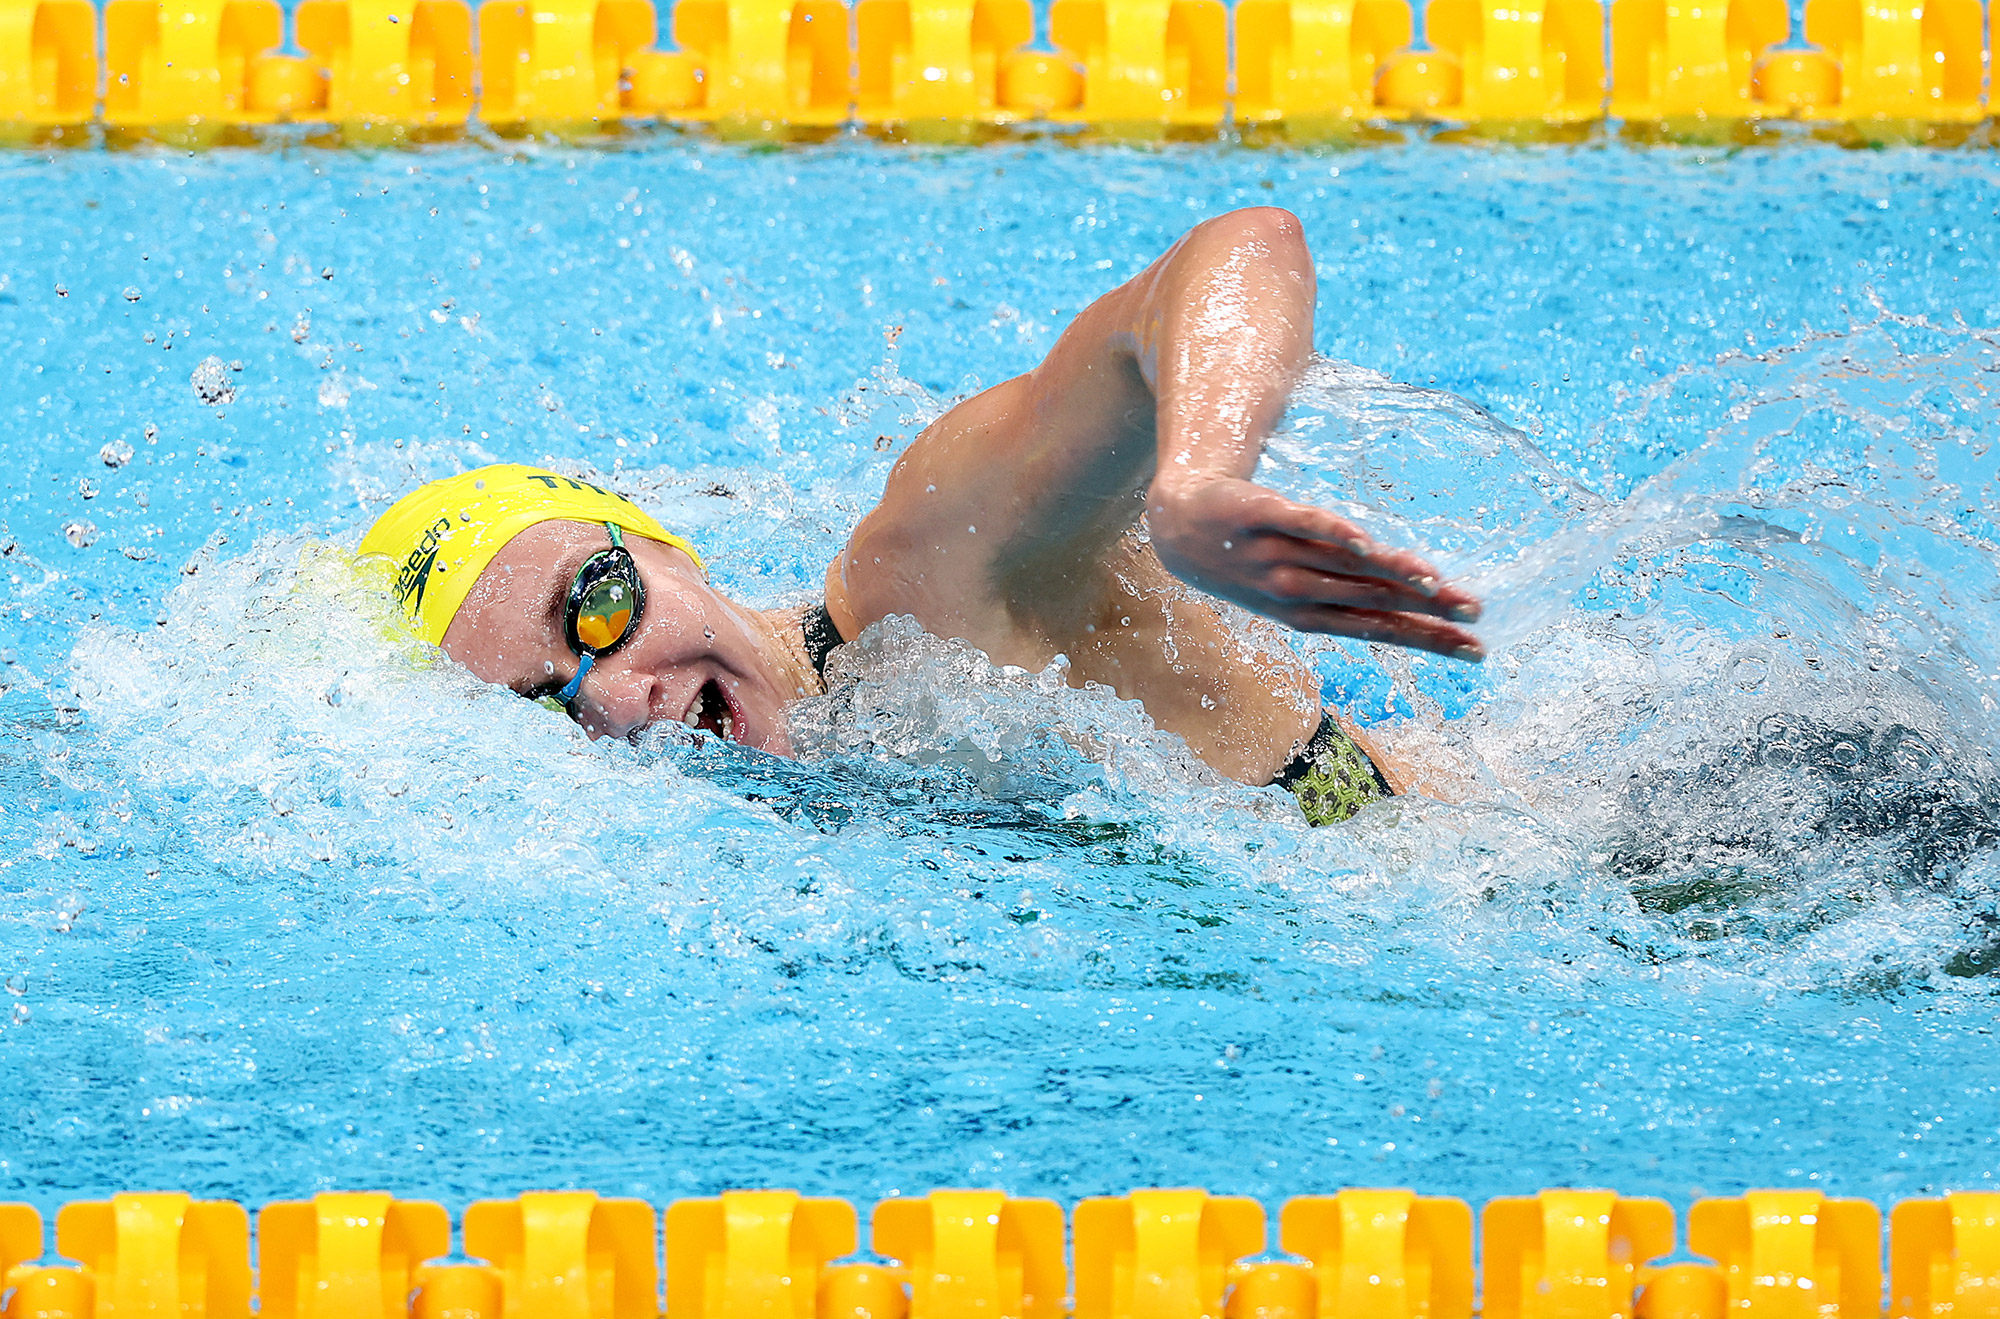 Ariarne Titmus of Team Australia competes in the 200m freestyle final on July 28.